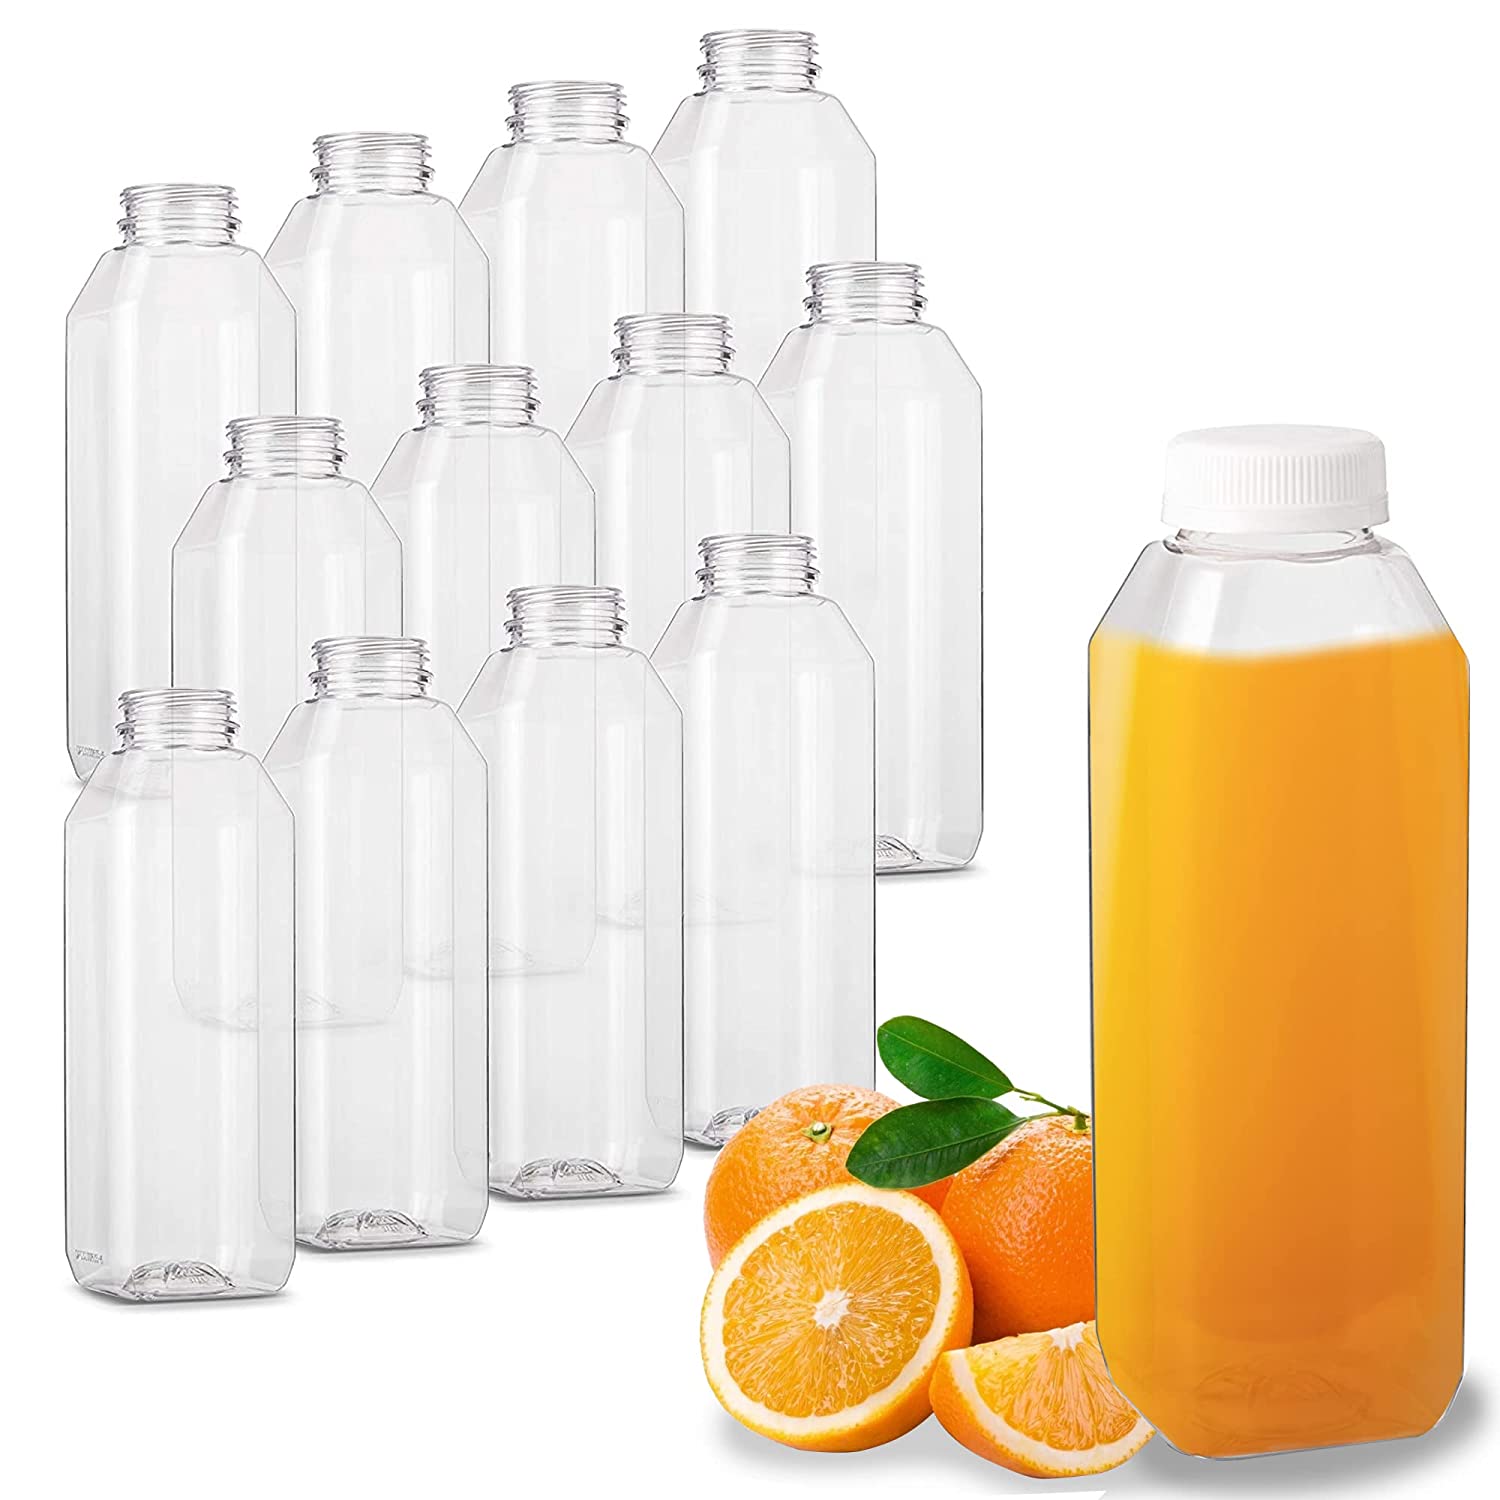 12 oz. Empty Clear Pet Plastic Juice Bottles with Tamper Evident Caps by MT Products - Set of 12 Bottles and 12